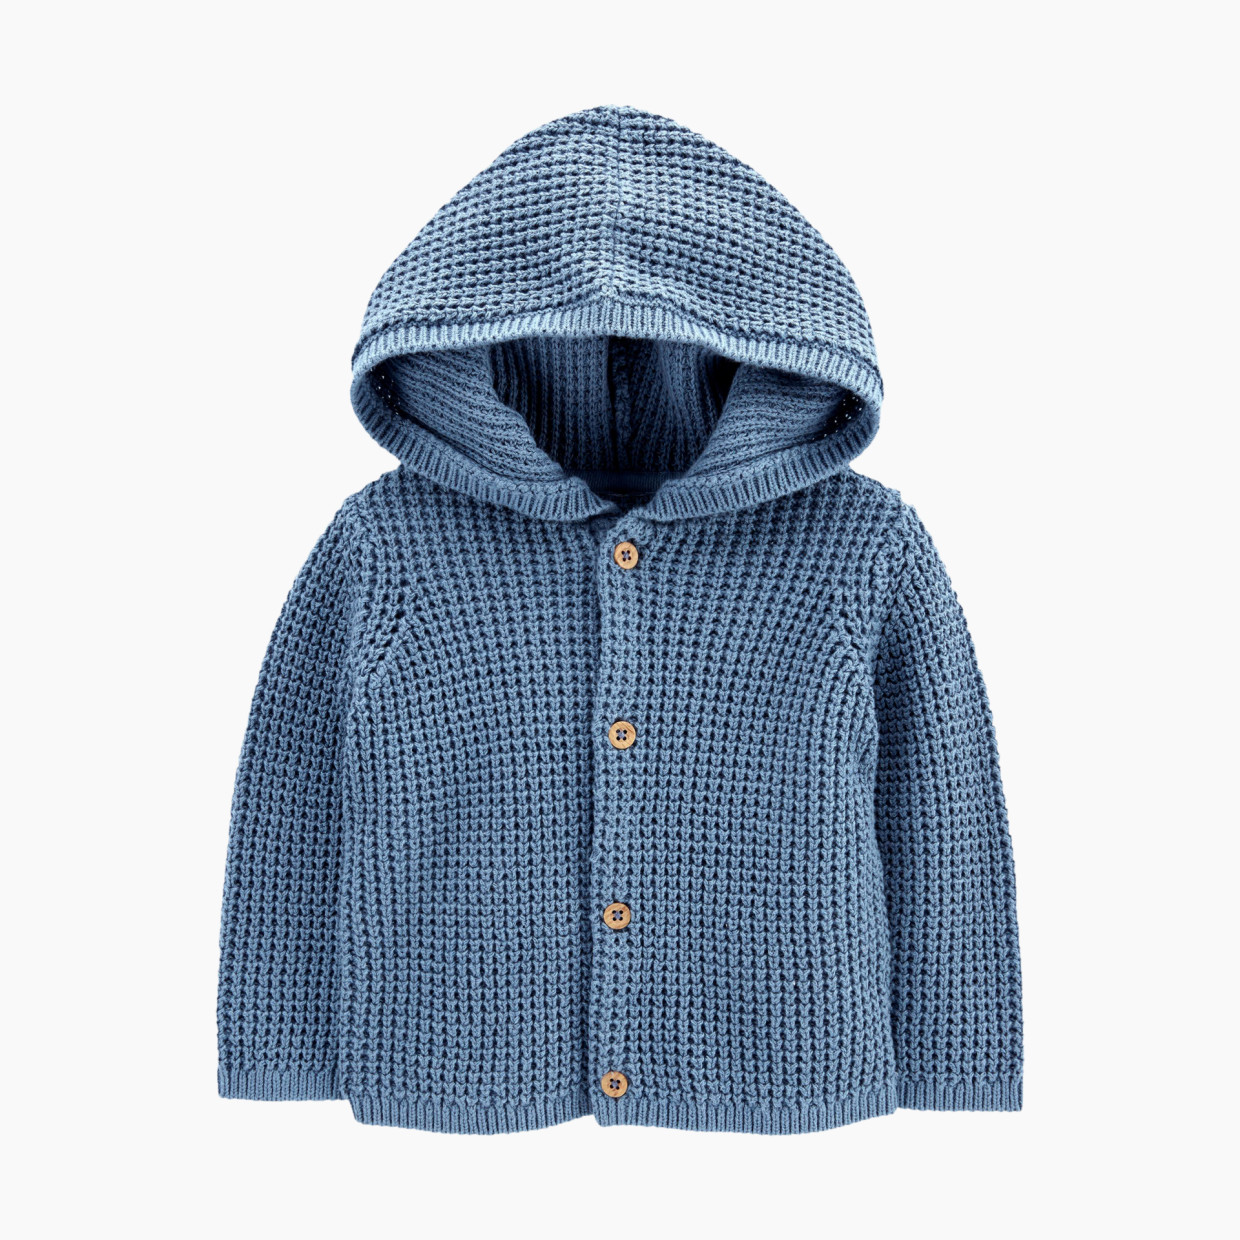 Carter's Hooded Cotton Cardigan - Blue, 3 M.